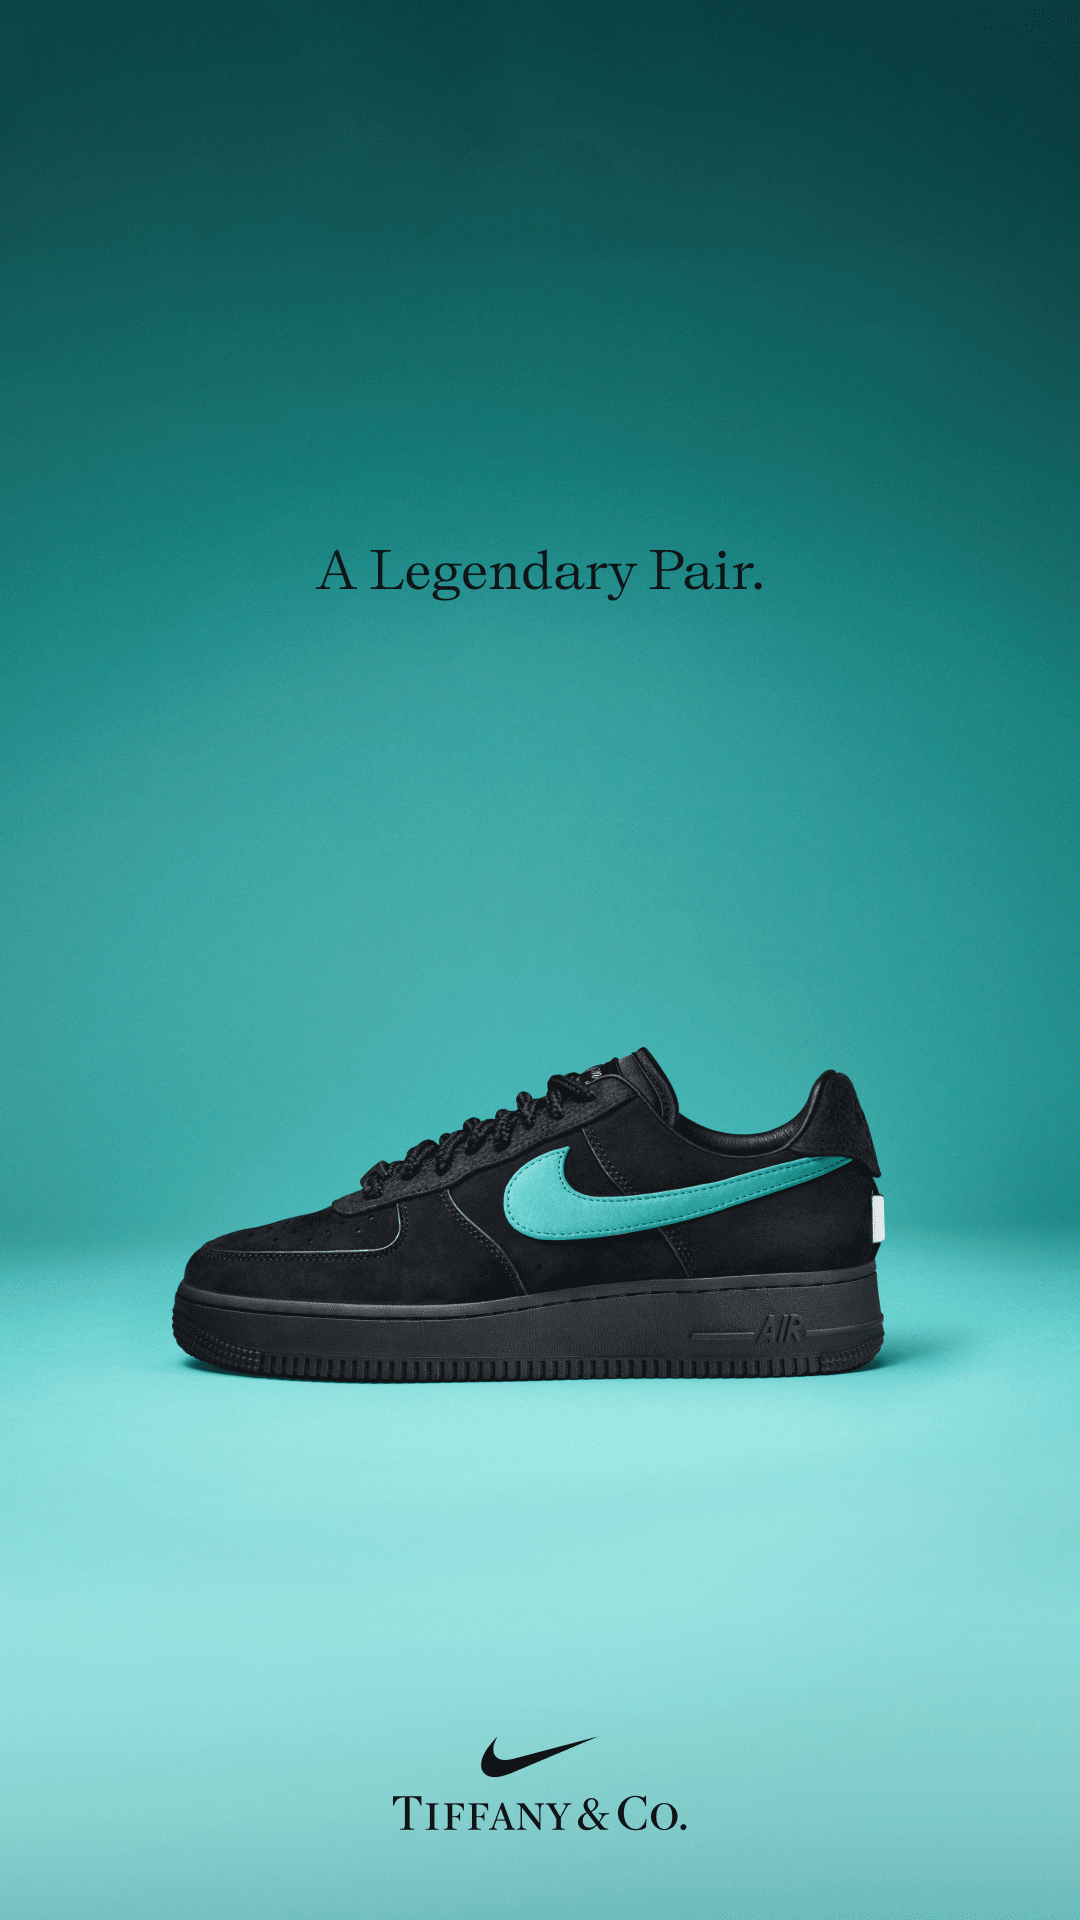 snkrs-special-air-force-1-x-tiffany-co